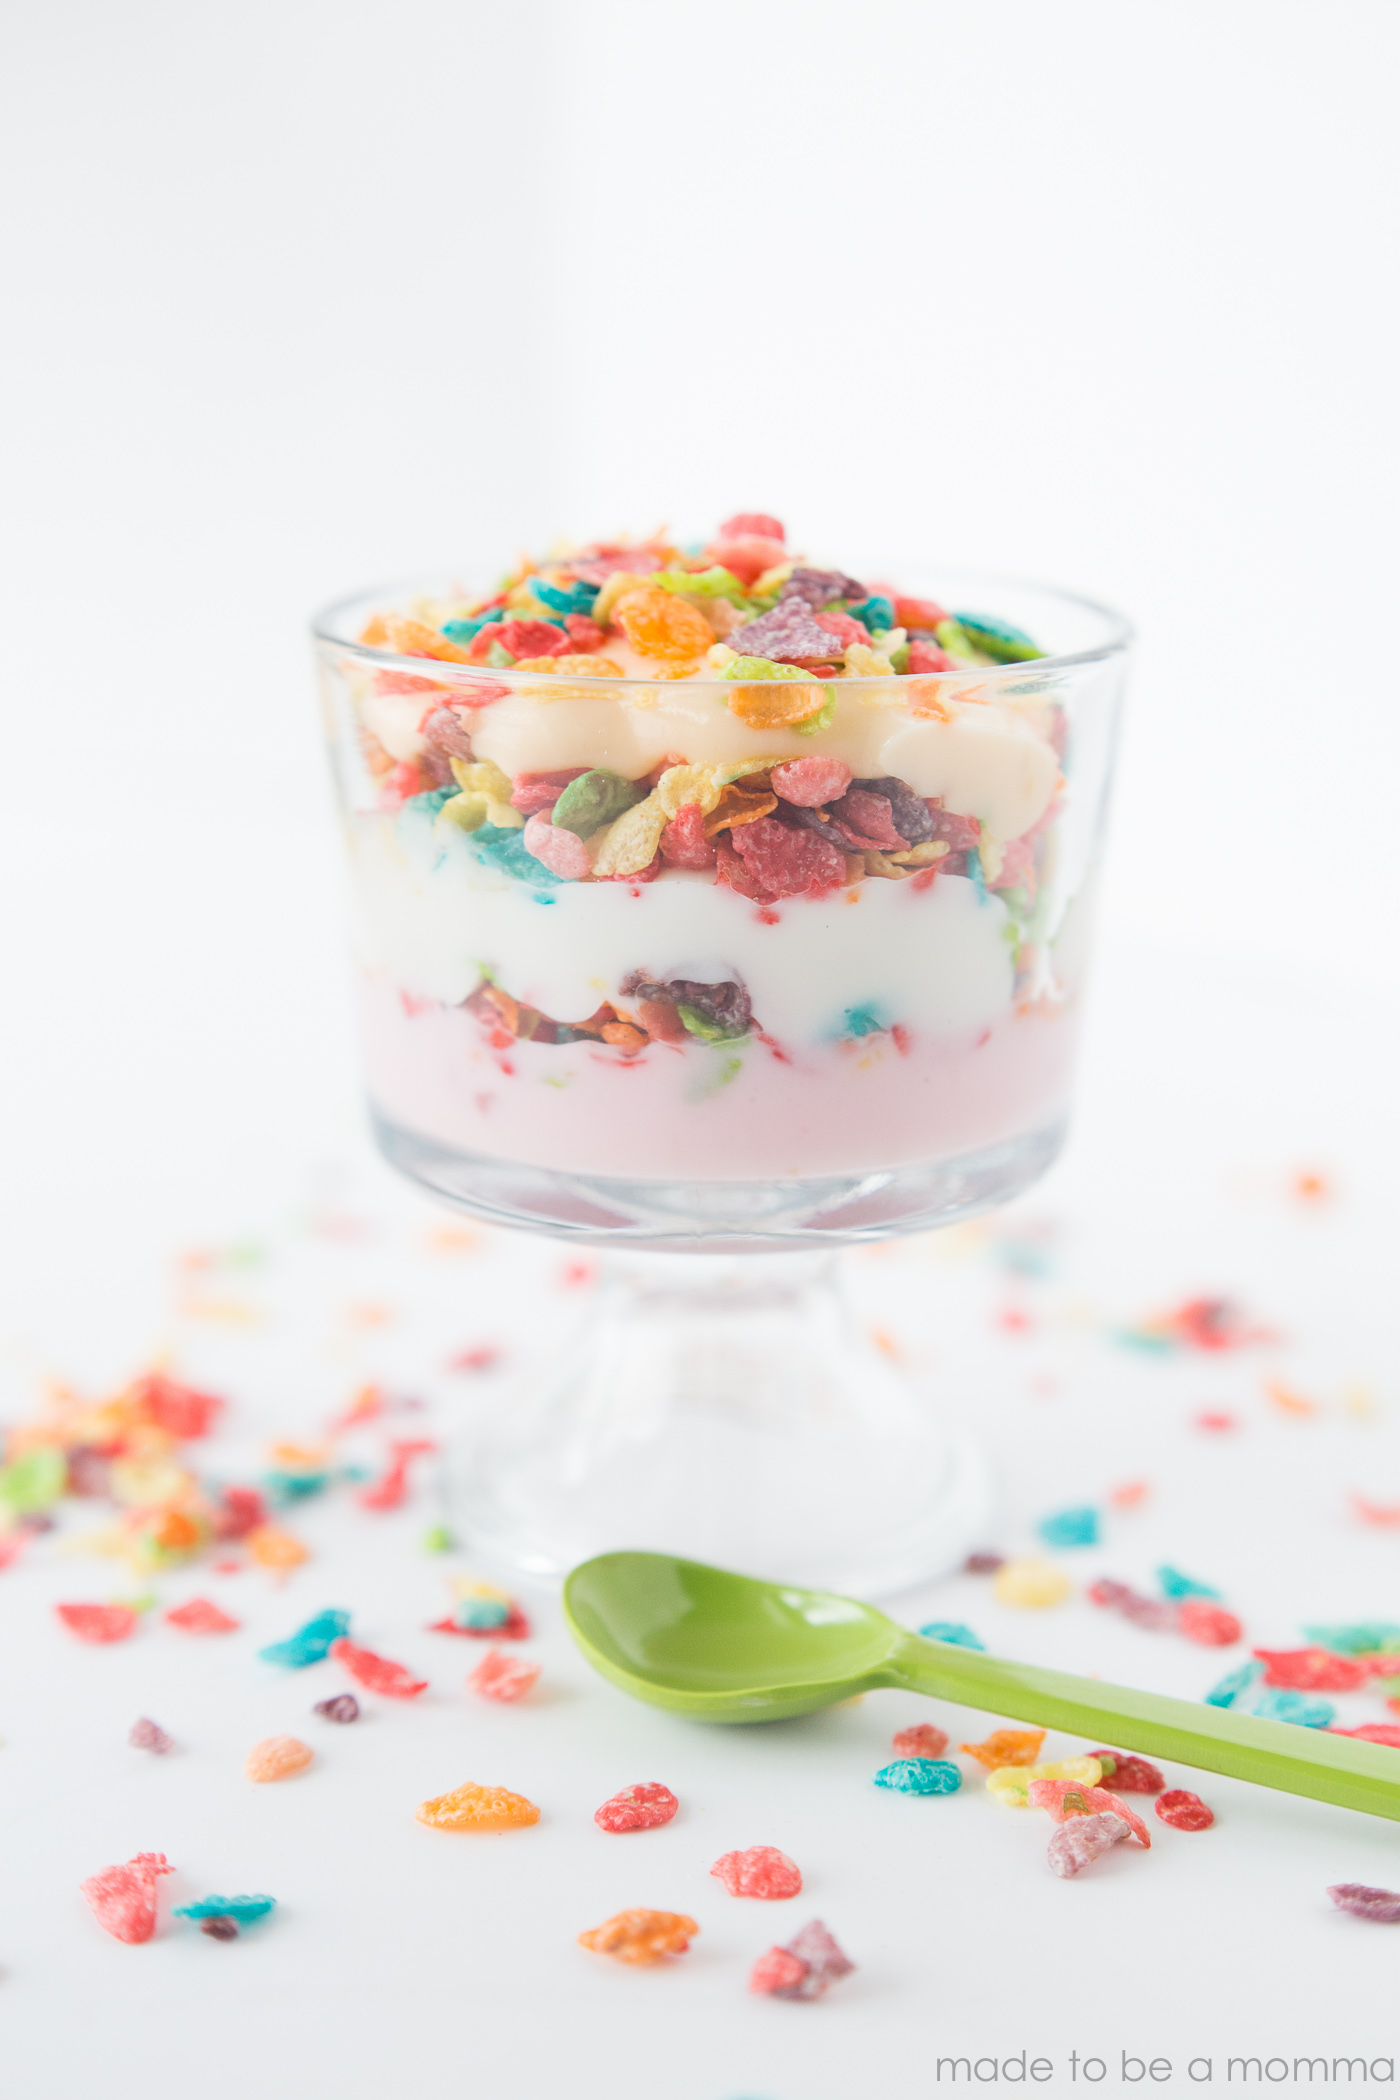 These Rainbow Parfaits are a colorful and yummy treat for the kids